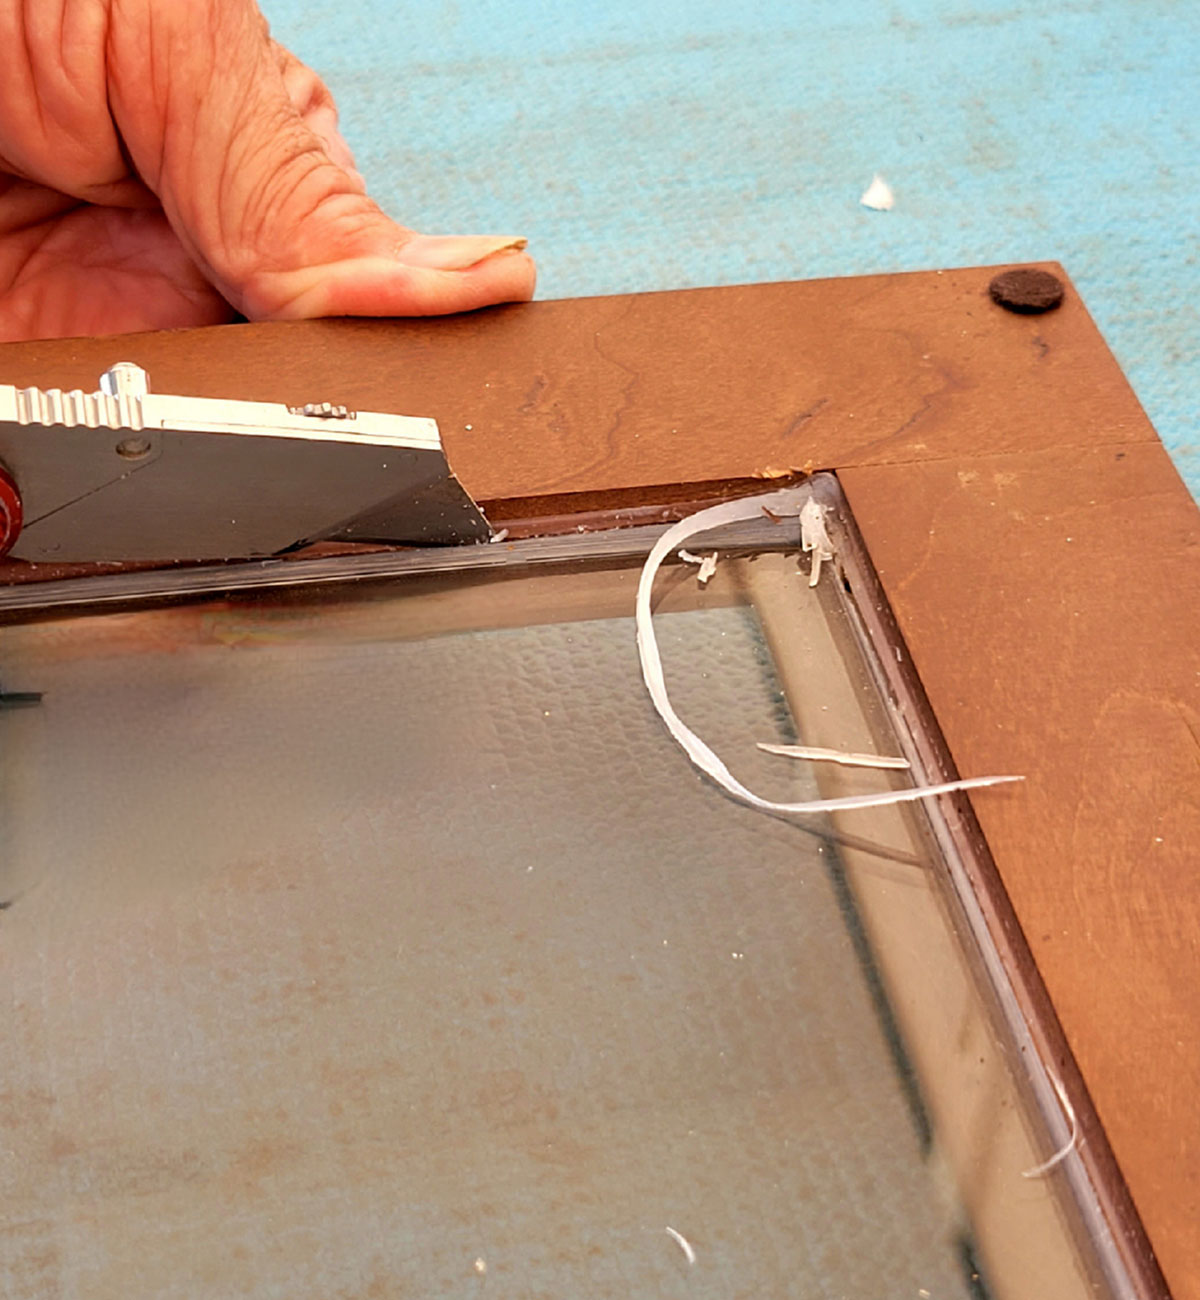 the silicone sealant holding the glass in place on the compartment door is carefully sliced with a razor knife